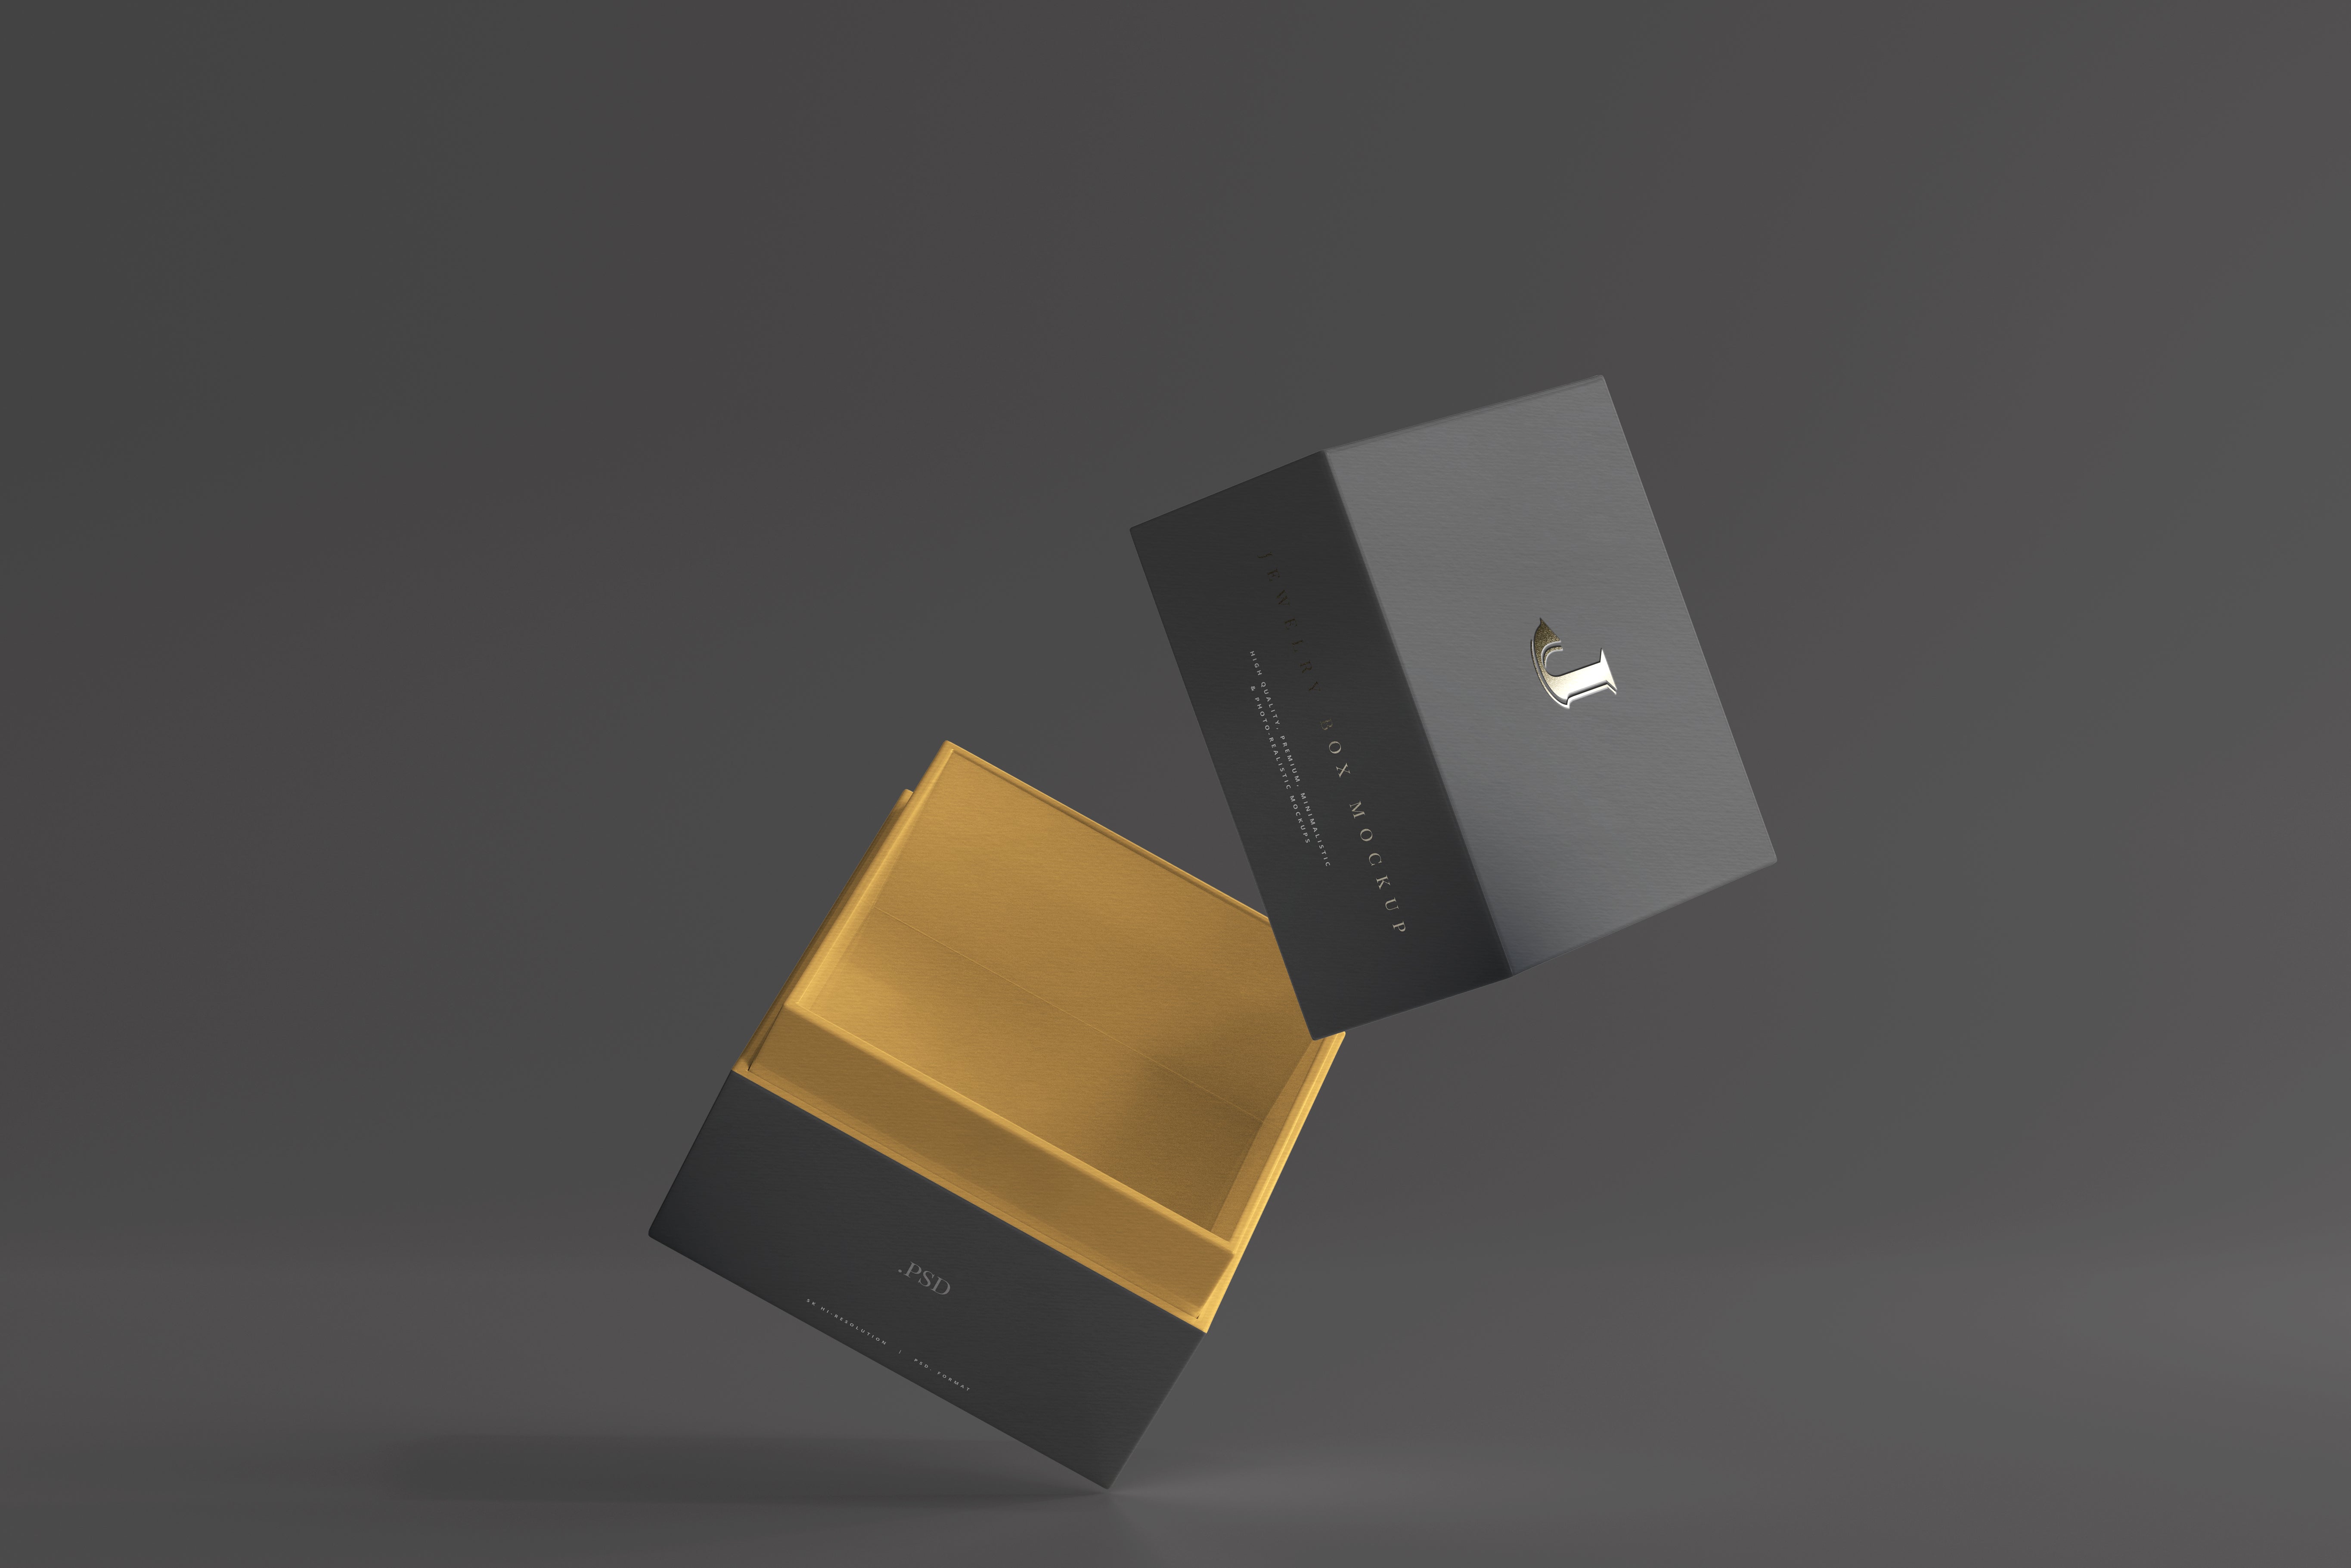 Elegant Open Leather and Gold Gift Box Mockup on Black Background. Luxury  Packaging Box for Premium Products Stock Photo - Image of object,  background: 135162810